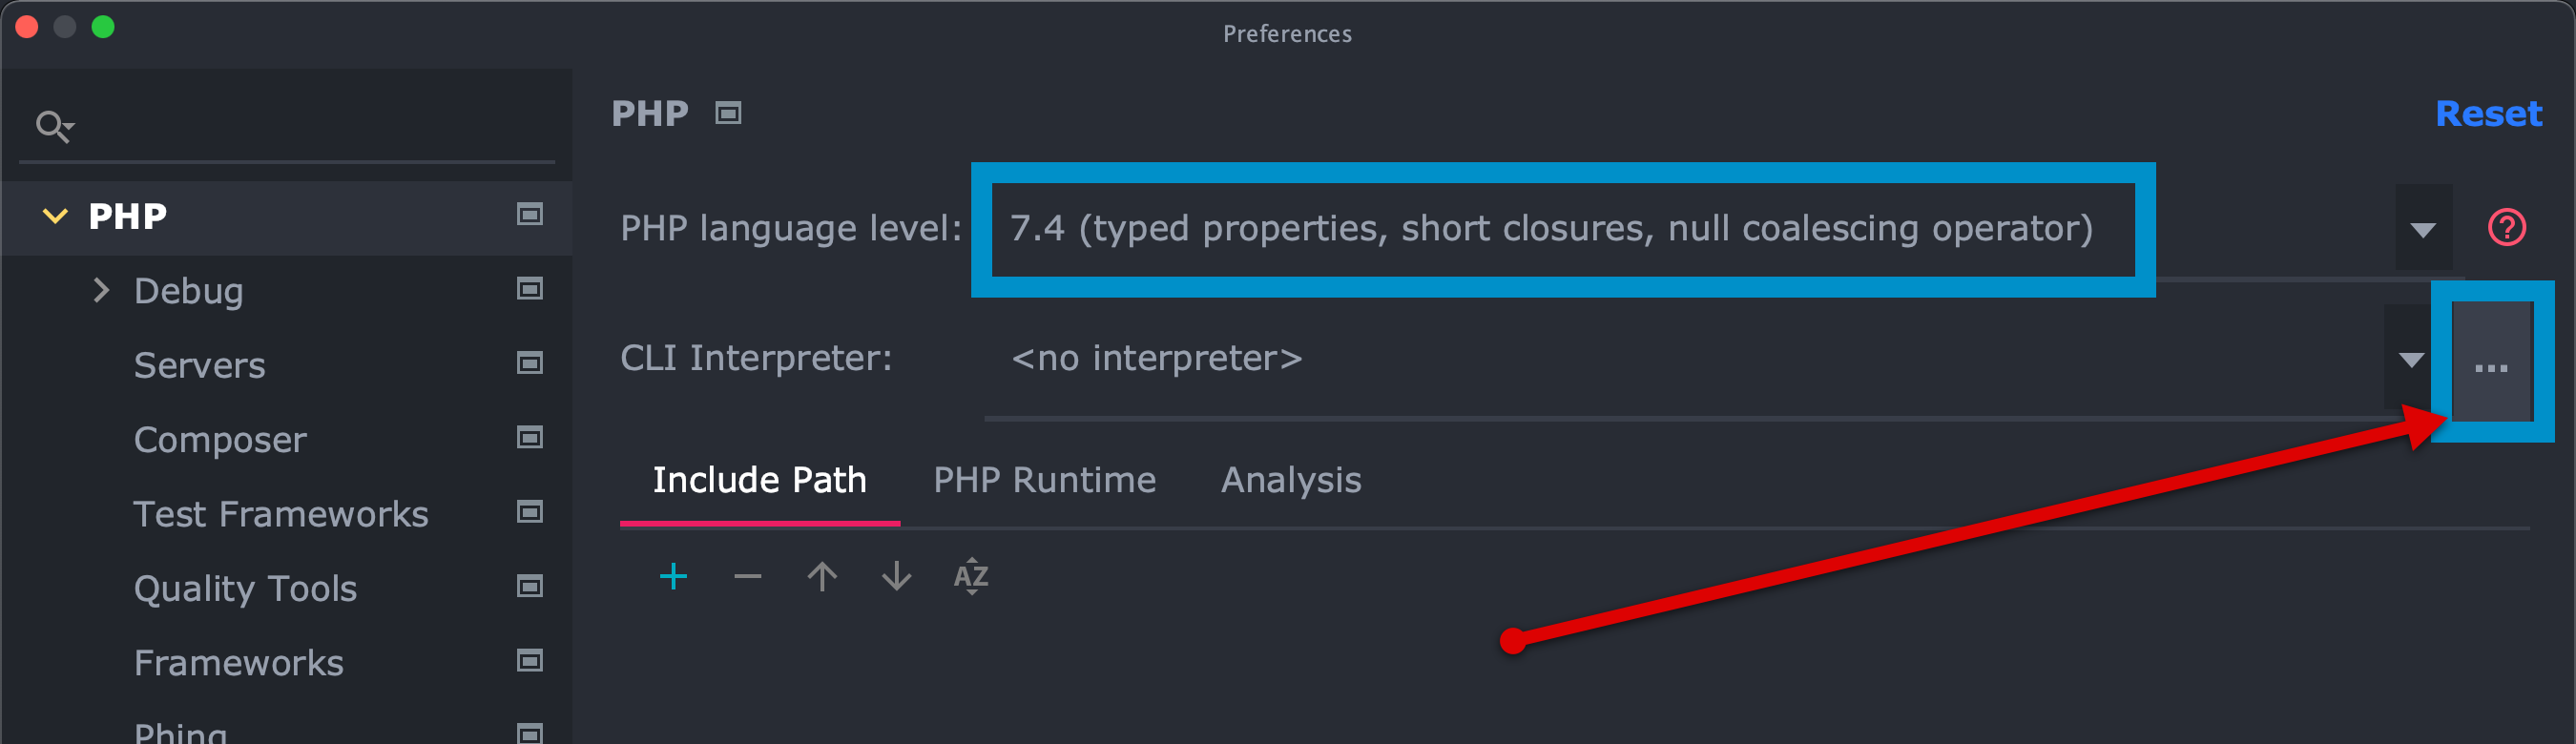 Choosing a language level and a CLI interpreter in PHPStorm